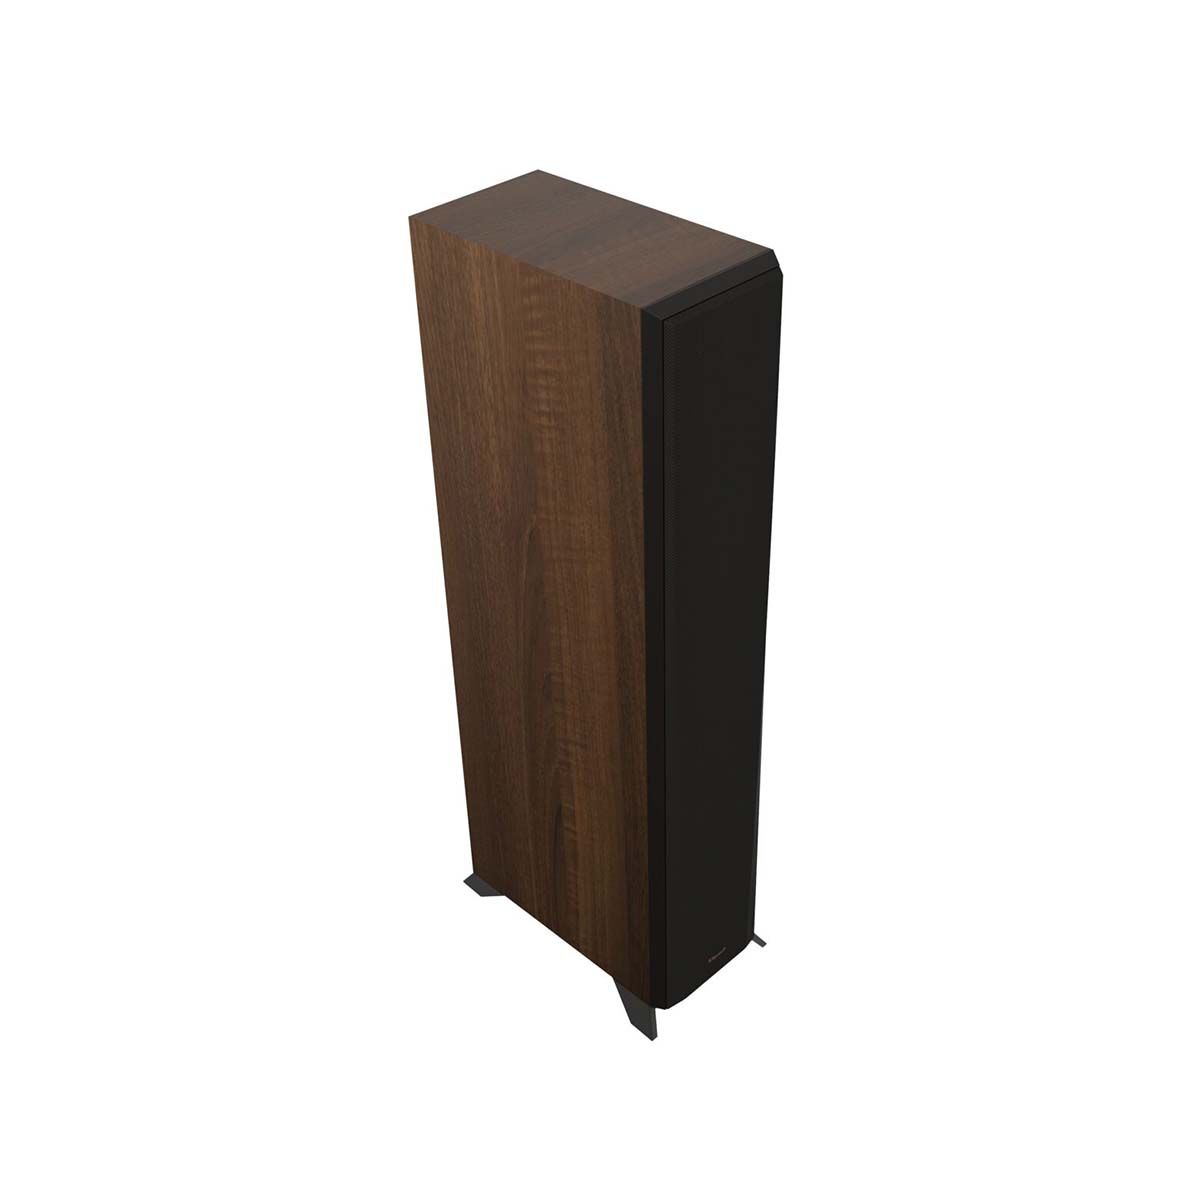 Klipsch RP-5000F II Floorstanding Speaker - Walnut - angled front view with grill